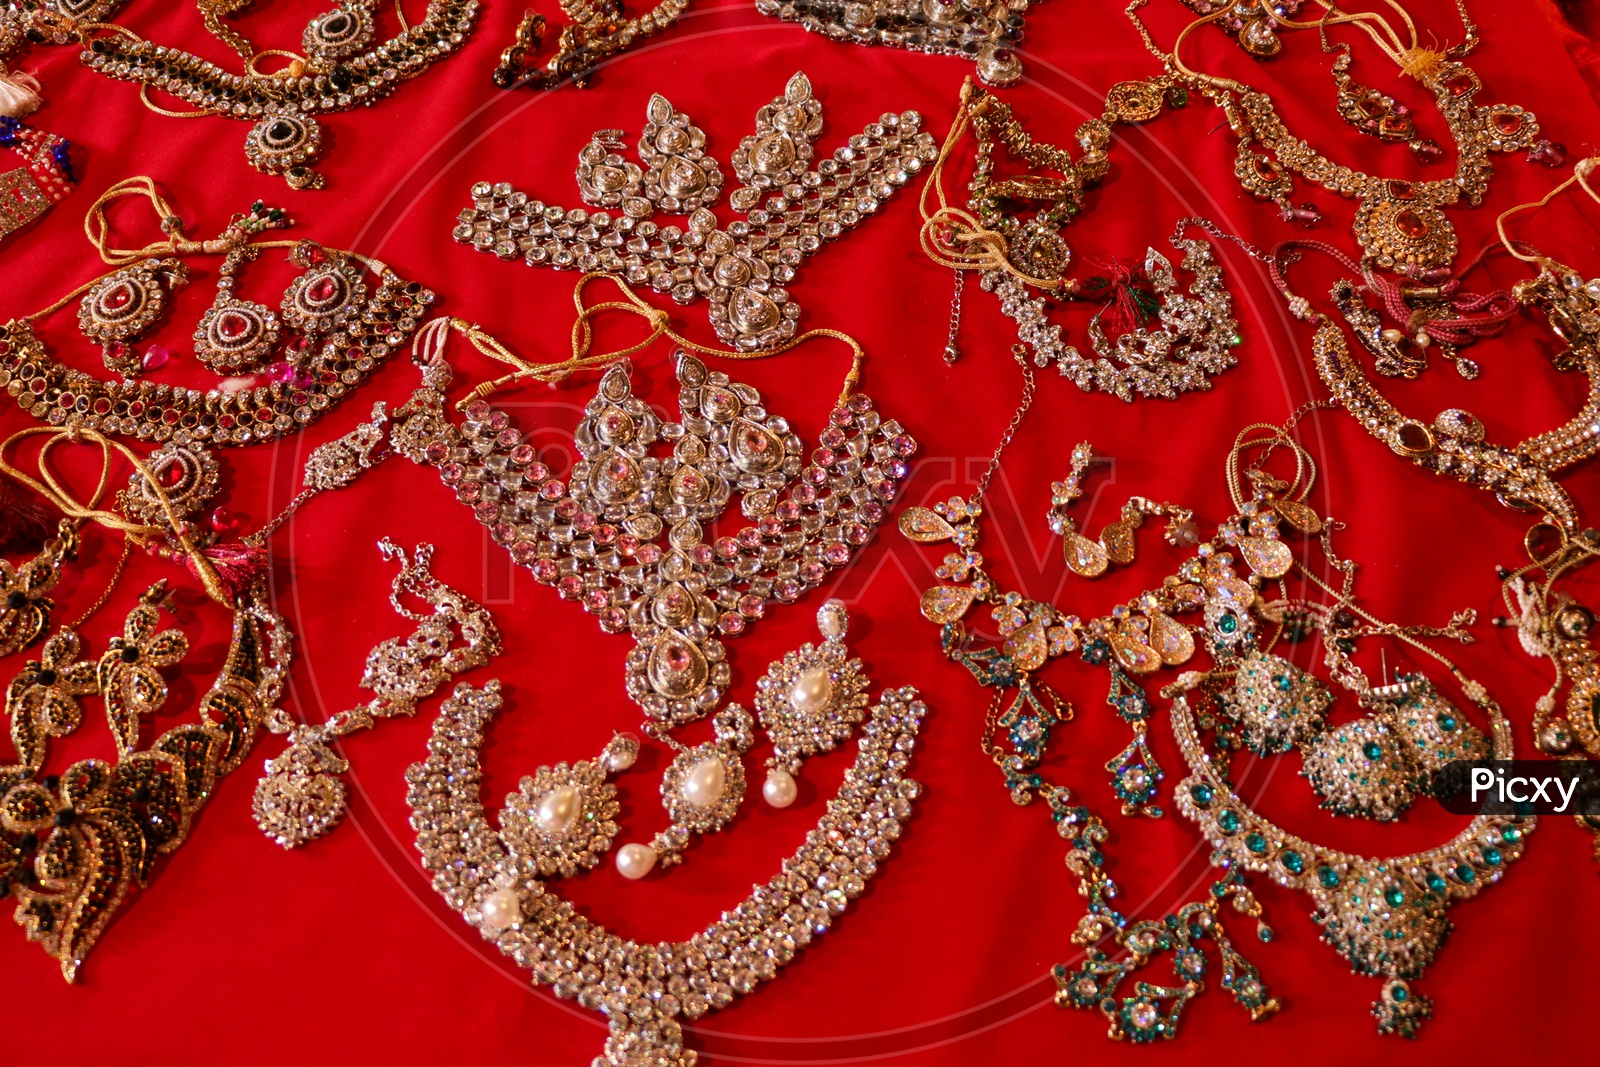 Imitation Jewelery Placed Arbitrarily On red Cloth